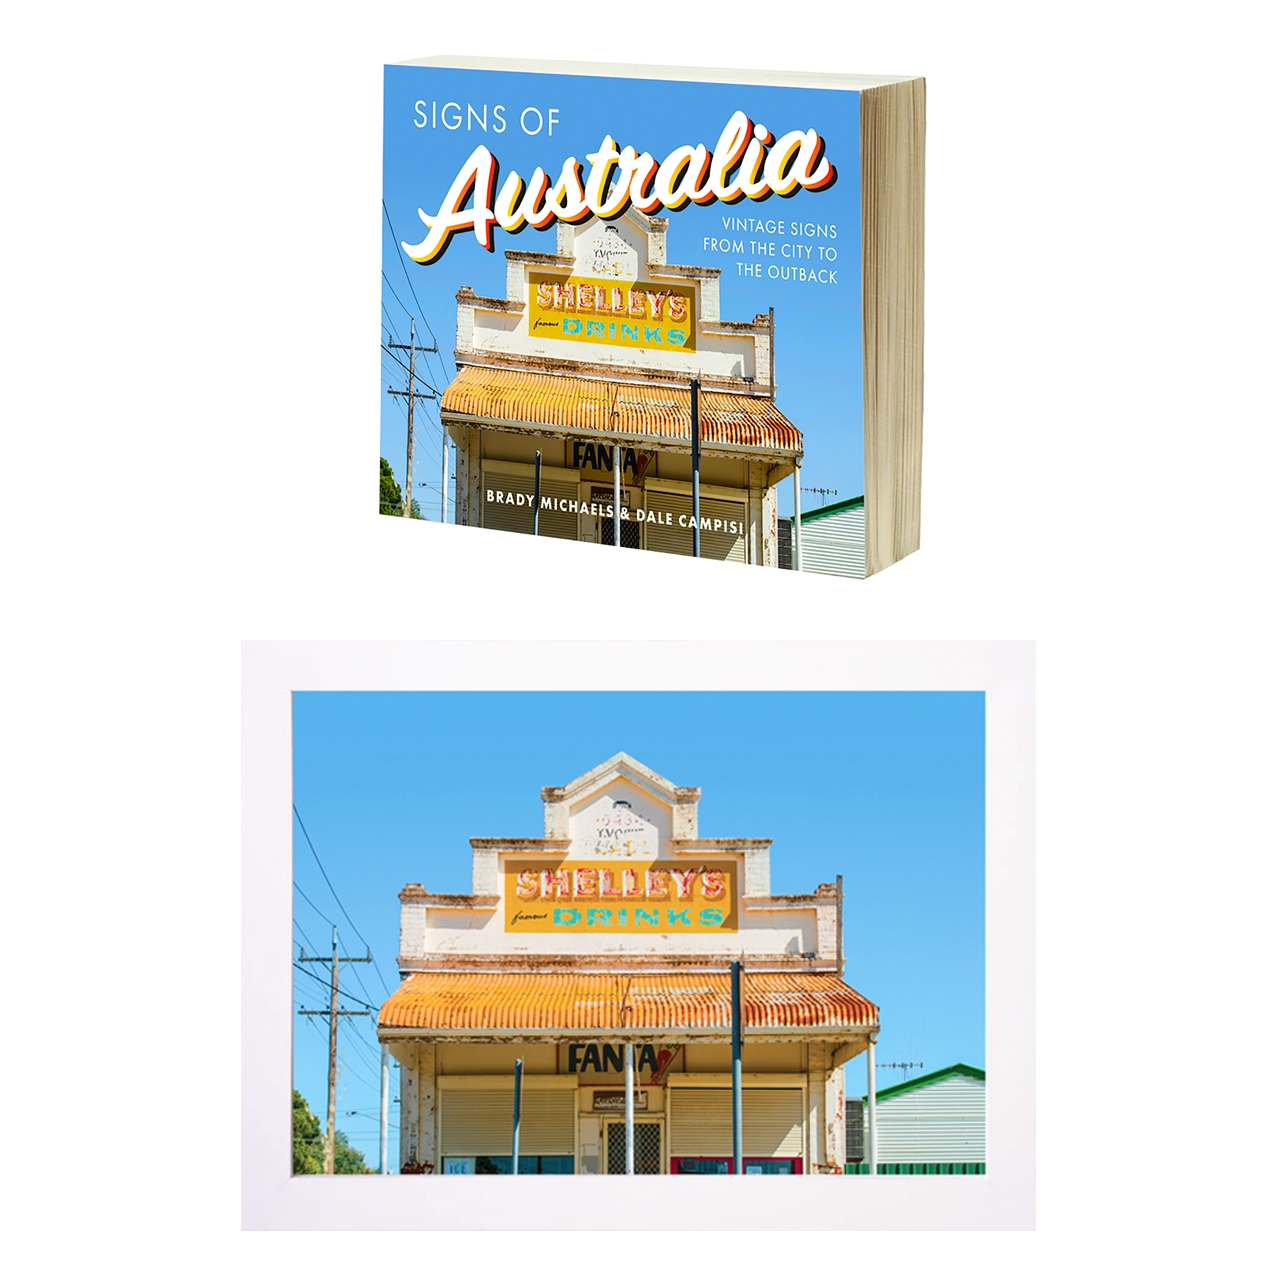 SIGNS OF AUSTRALIA BOOK + A4 PRINT COMBO